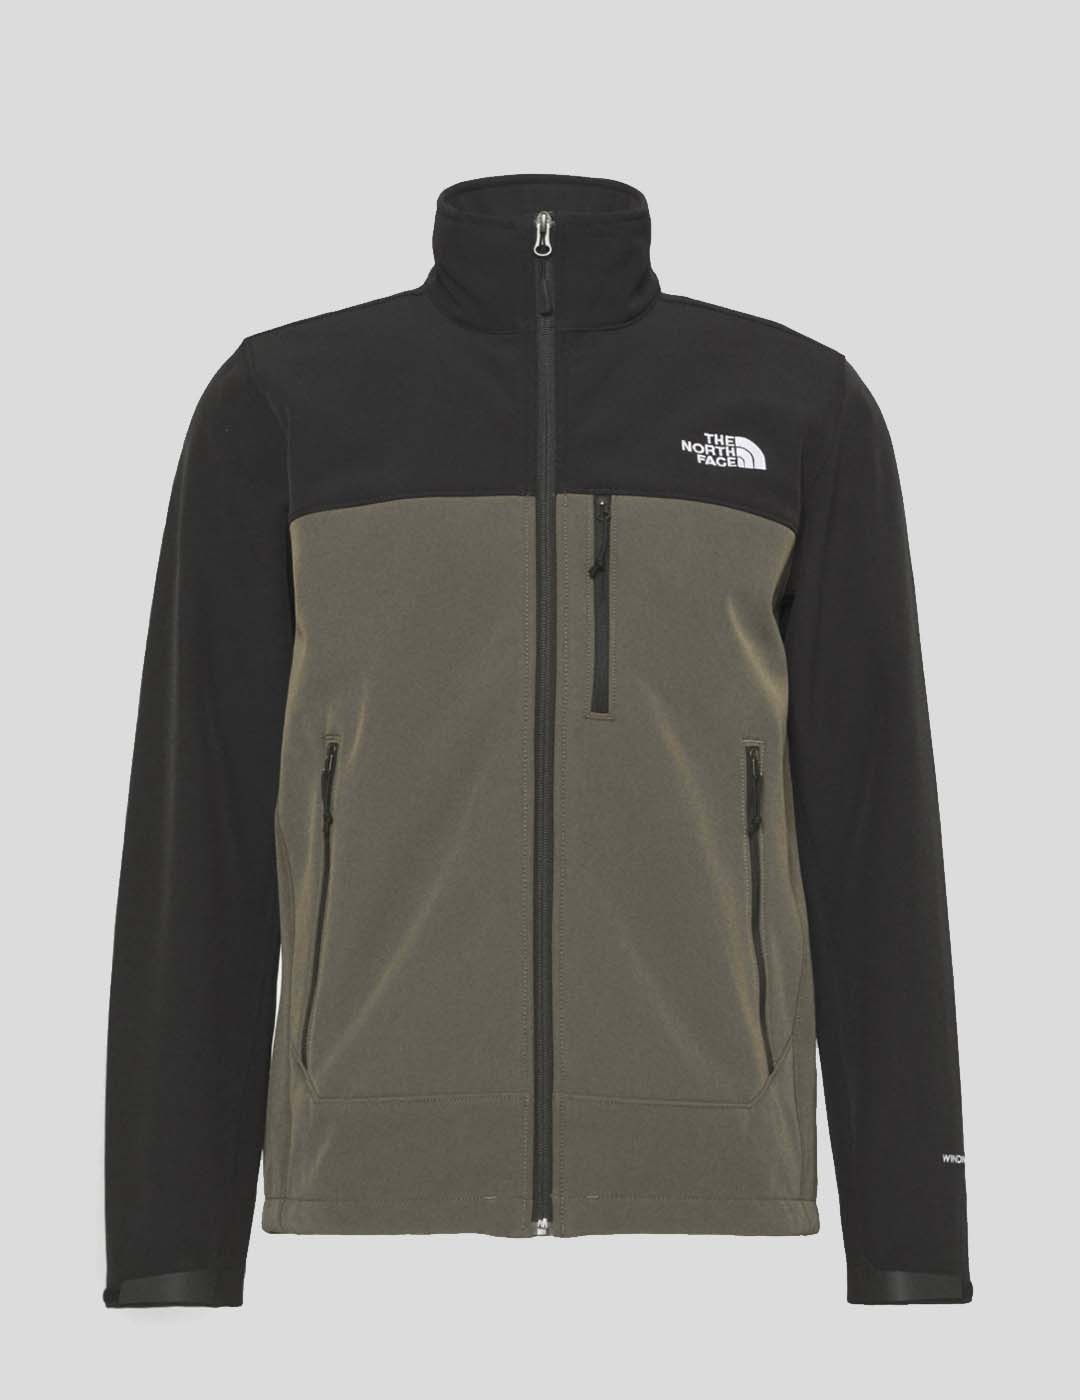 CHAQUETA THE NORTH FACE APEX BIONIC JACKET NWTPEGRN/TNF